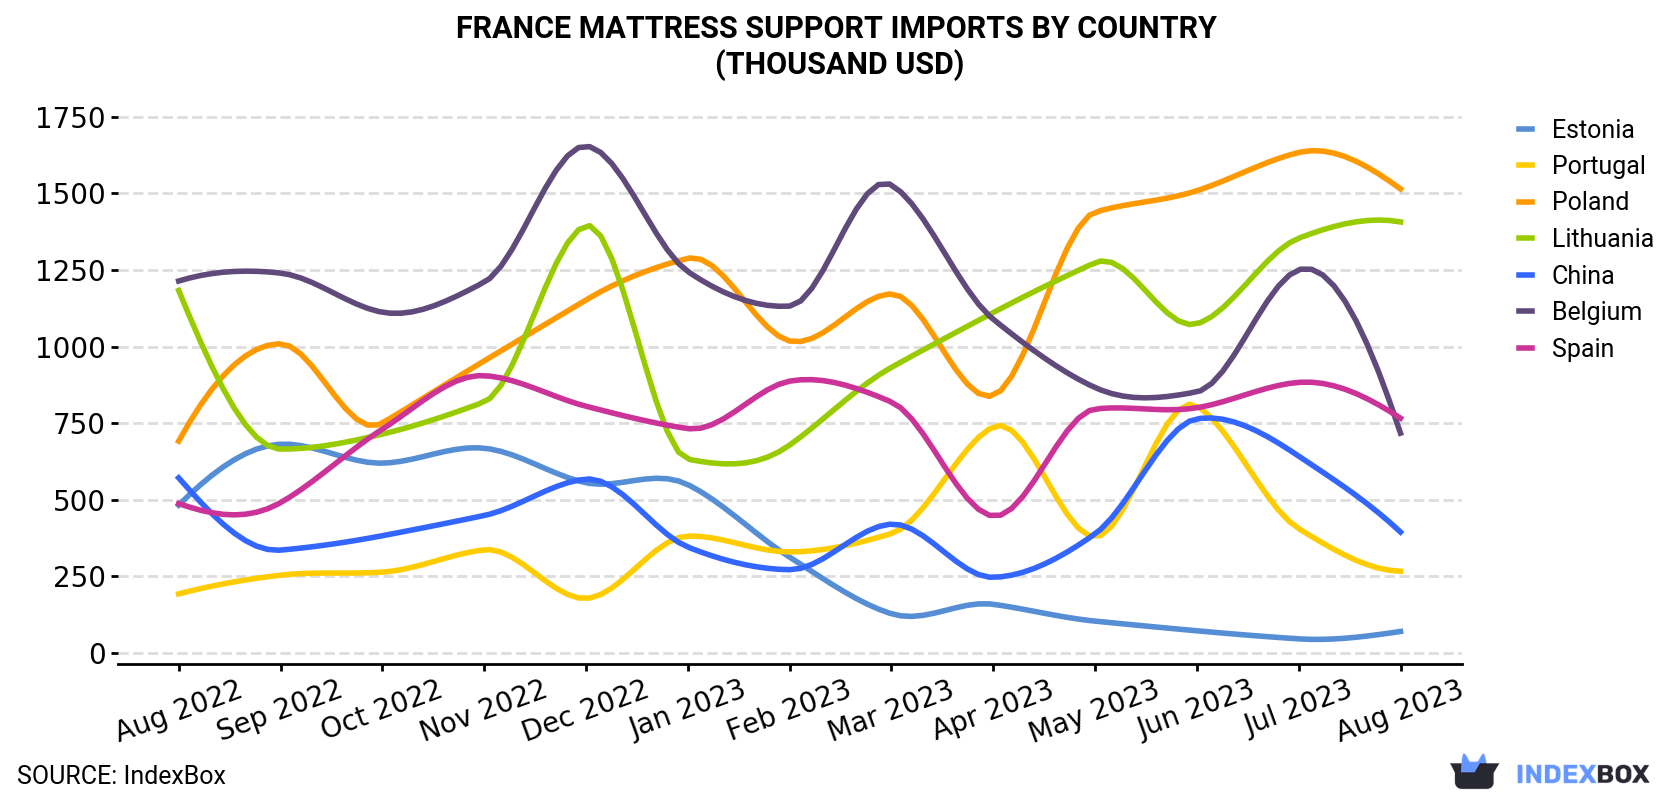 France Mattress Support Imports By Country (Thousand USD)